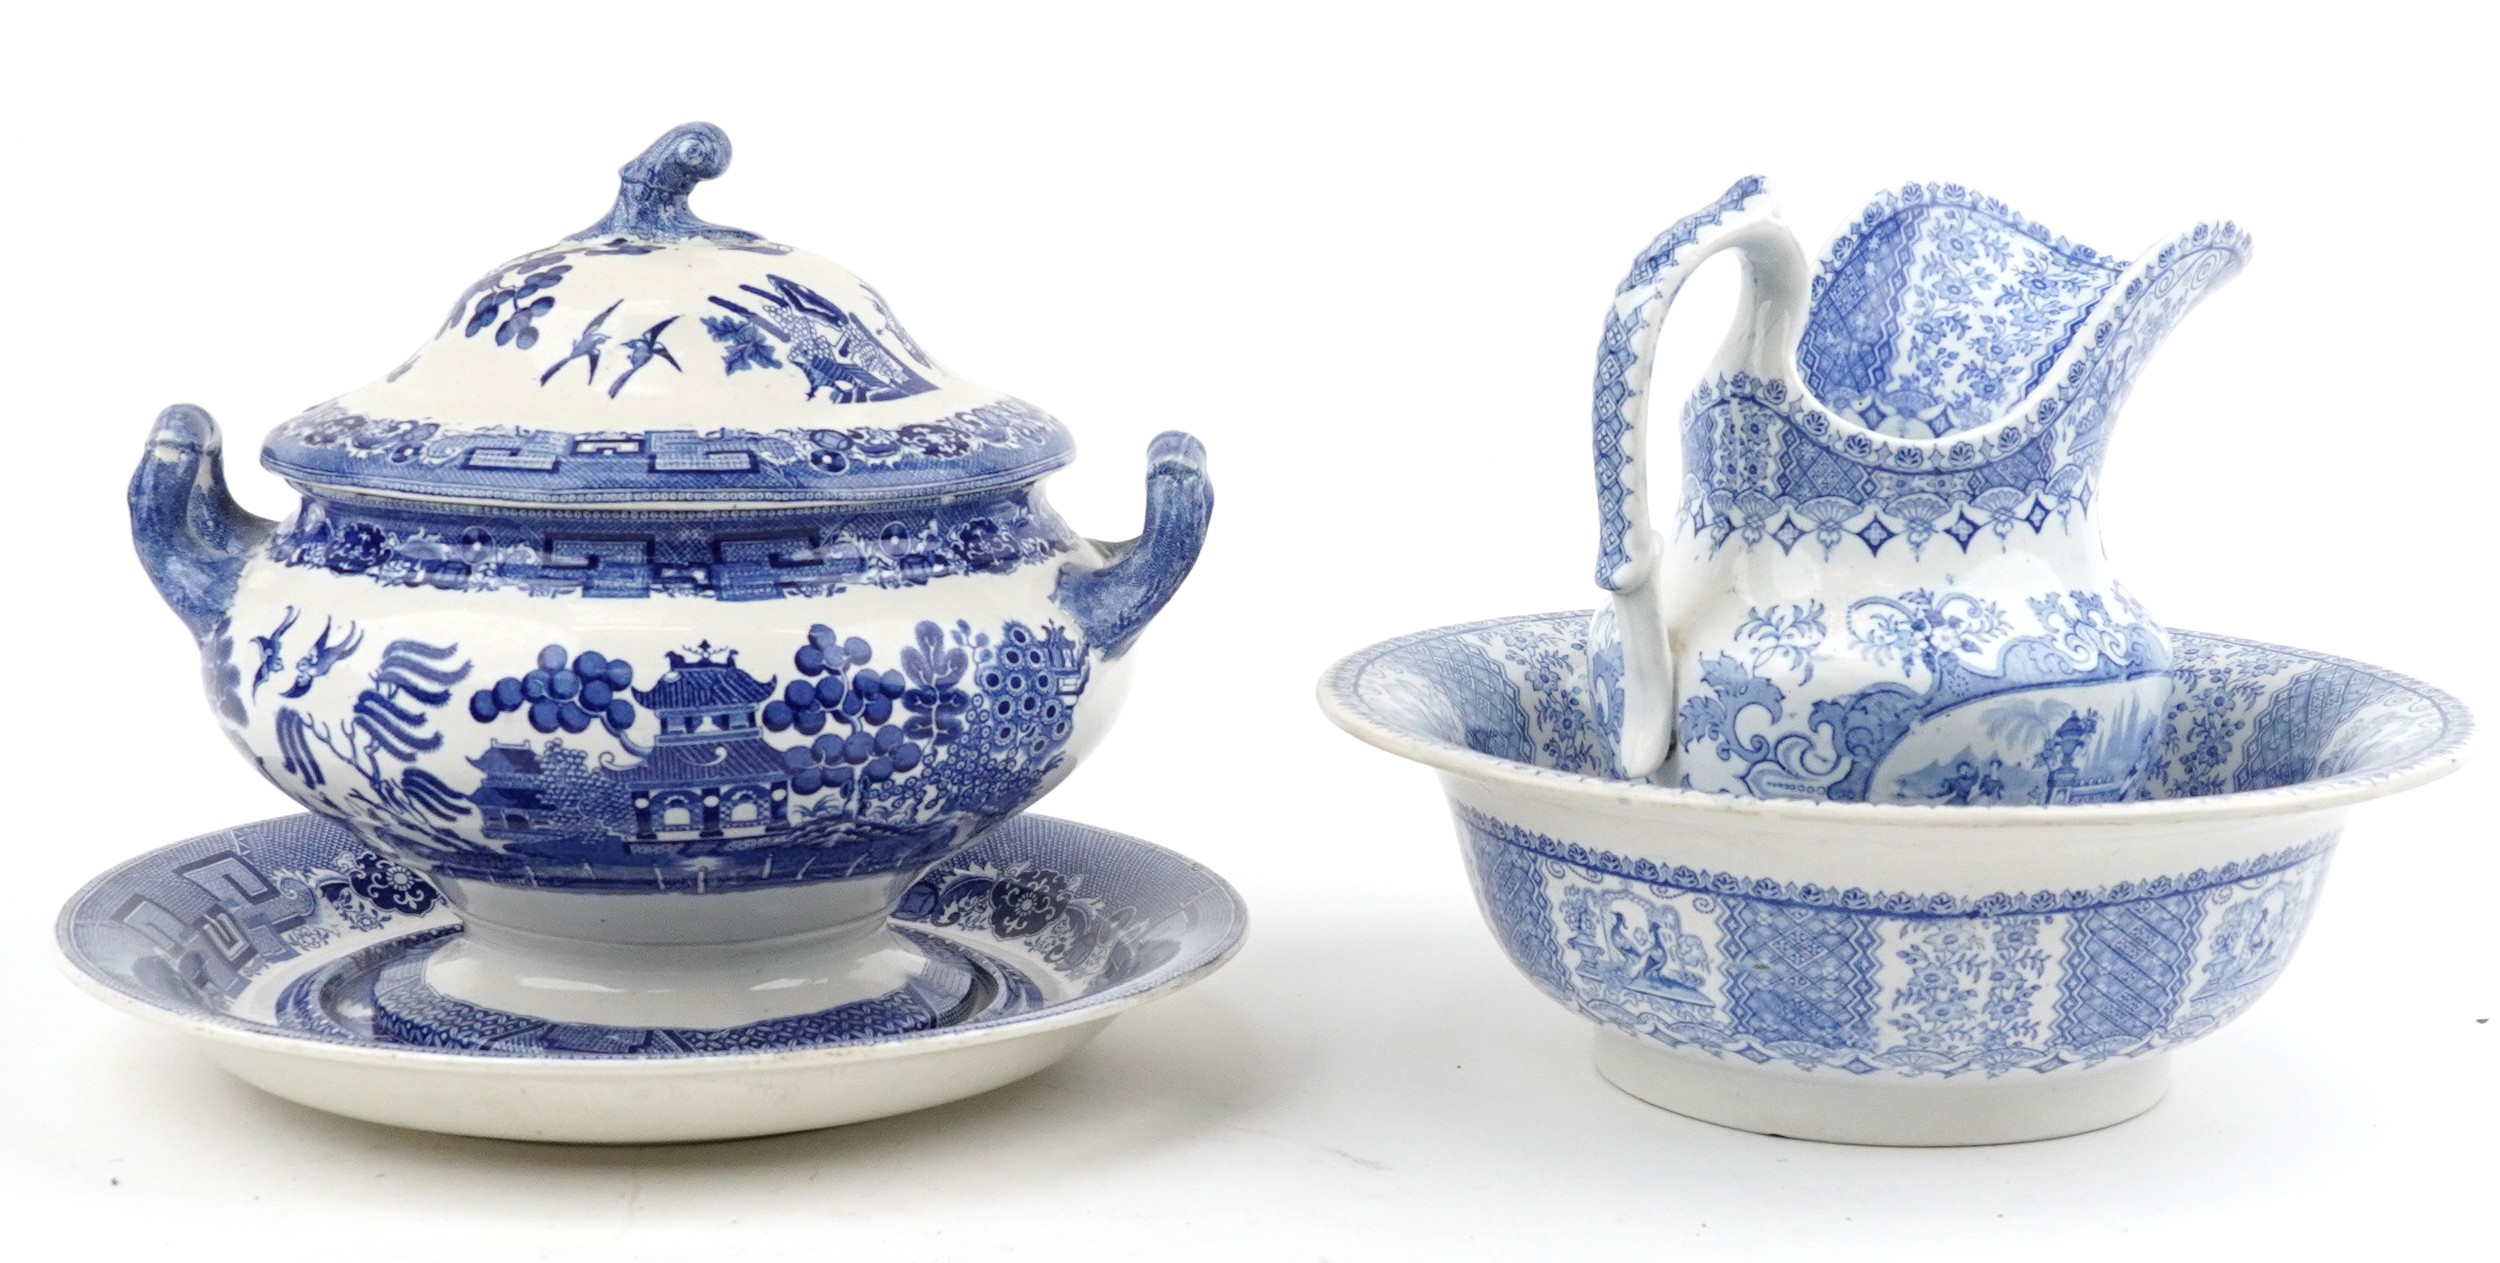 Victorian blue and white wash jug and basin, transfer printed in the Tyrolienne pattern and a - Image 2 of 10